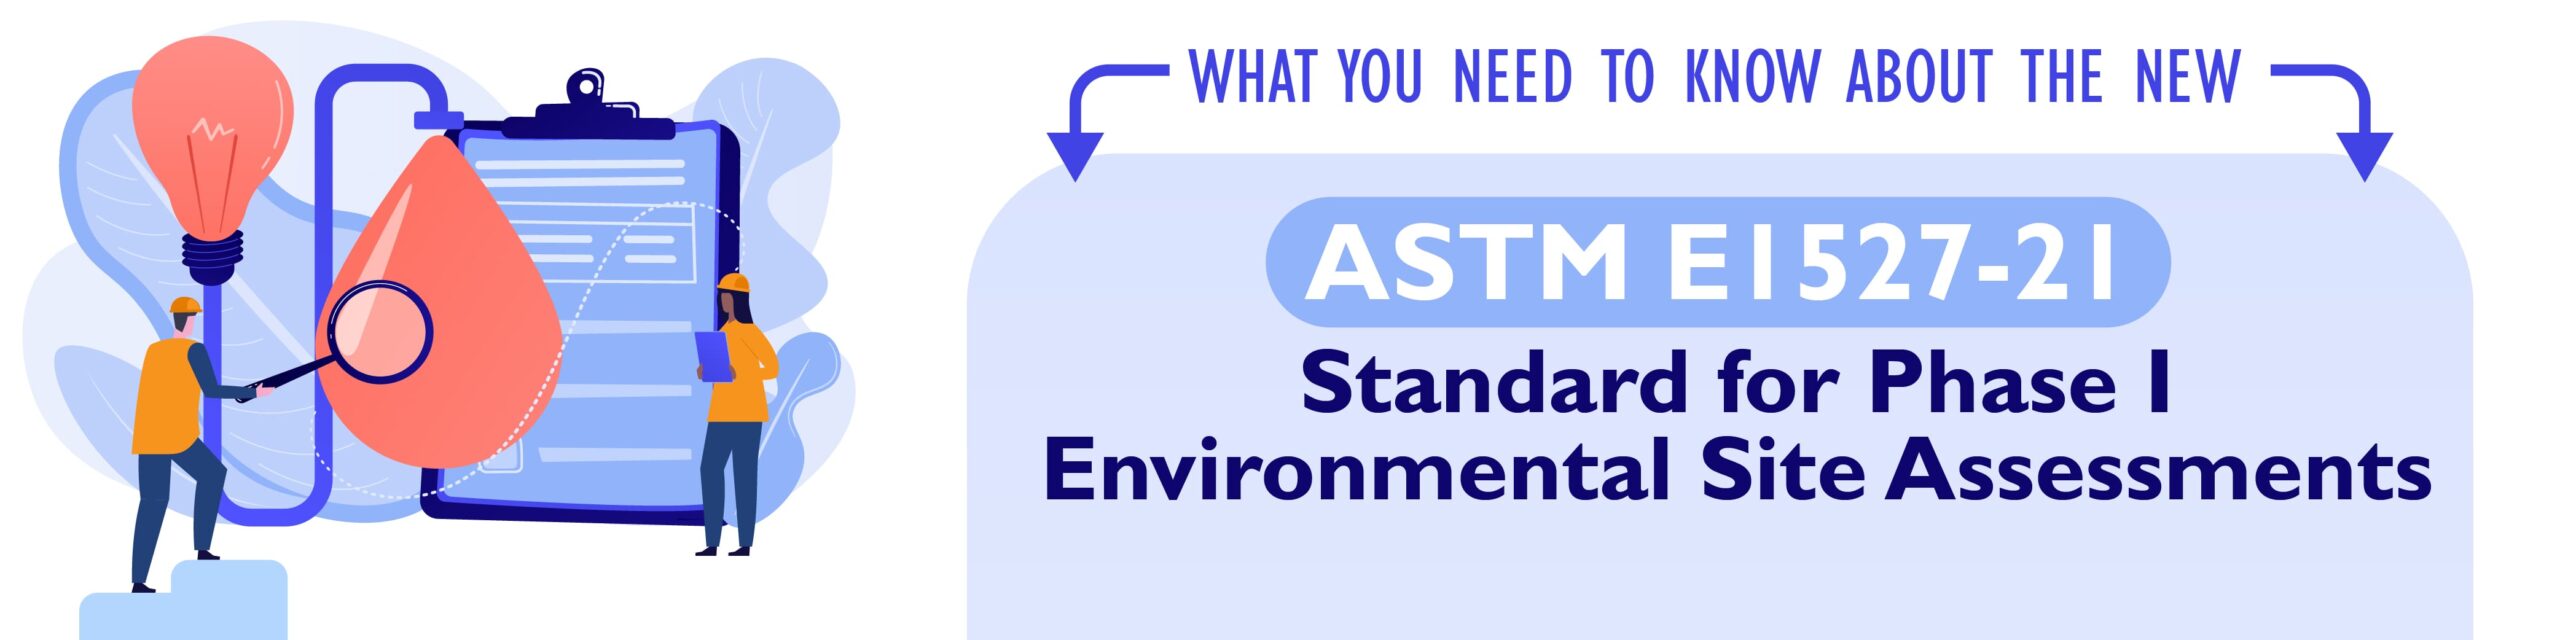 what you need to know about the new astm e1527-21 standard for phase 1 environmental site assessment